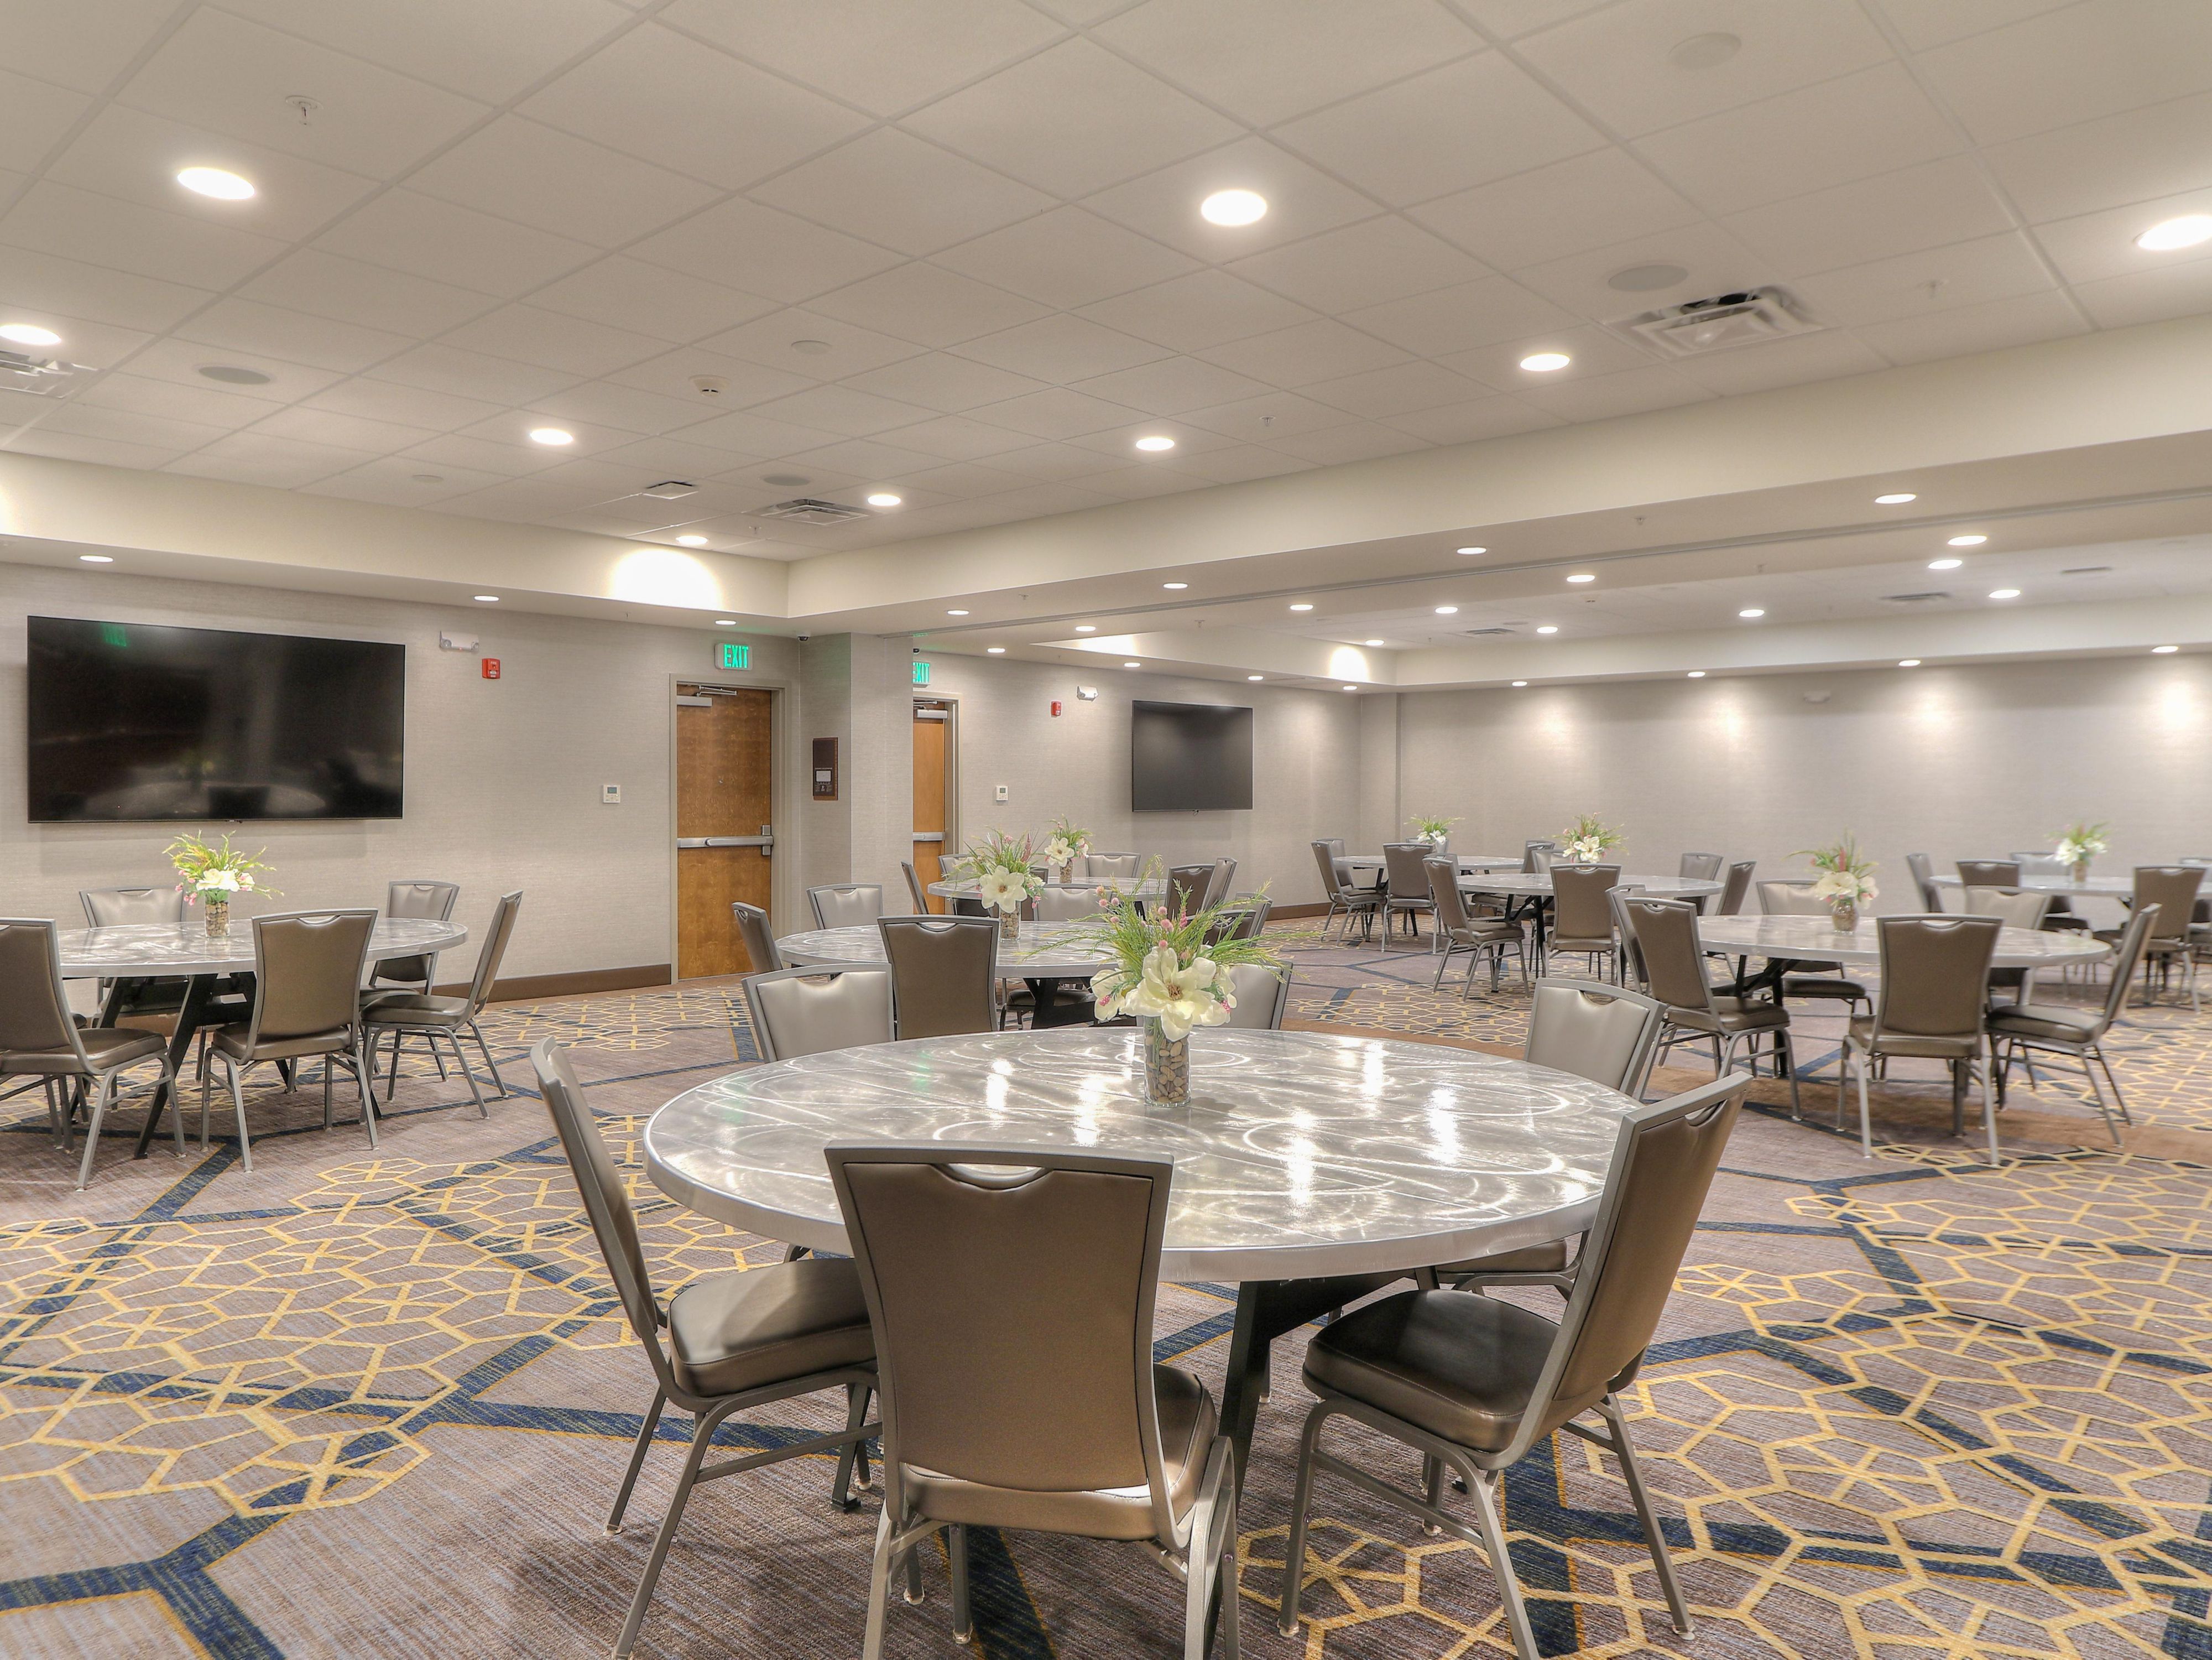 Host your meetings, events, celebrations, and reunions in 1700 square feet of versatile space in Pigeon Forge, including a ballroom, breakout rooms, and a pre-function area. The hotel features two indoor venues and an outdoor terrace with a fire pit and views of the Great Smoky Mountains. With audiovisual equipment, our team brings it all together.